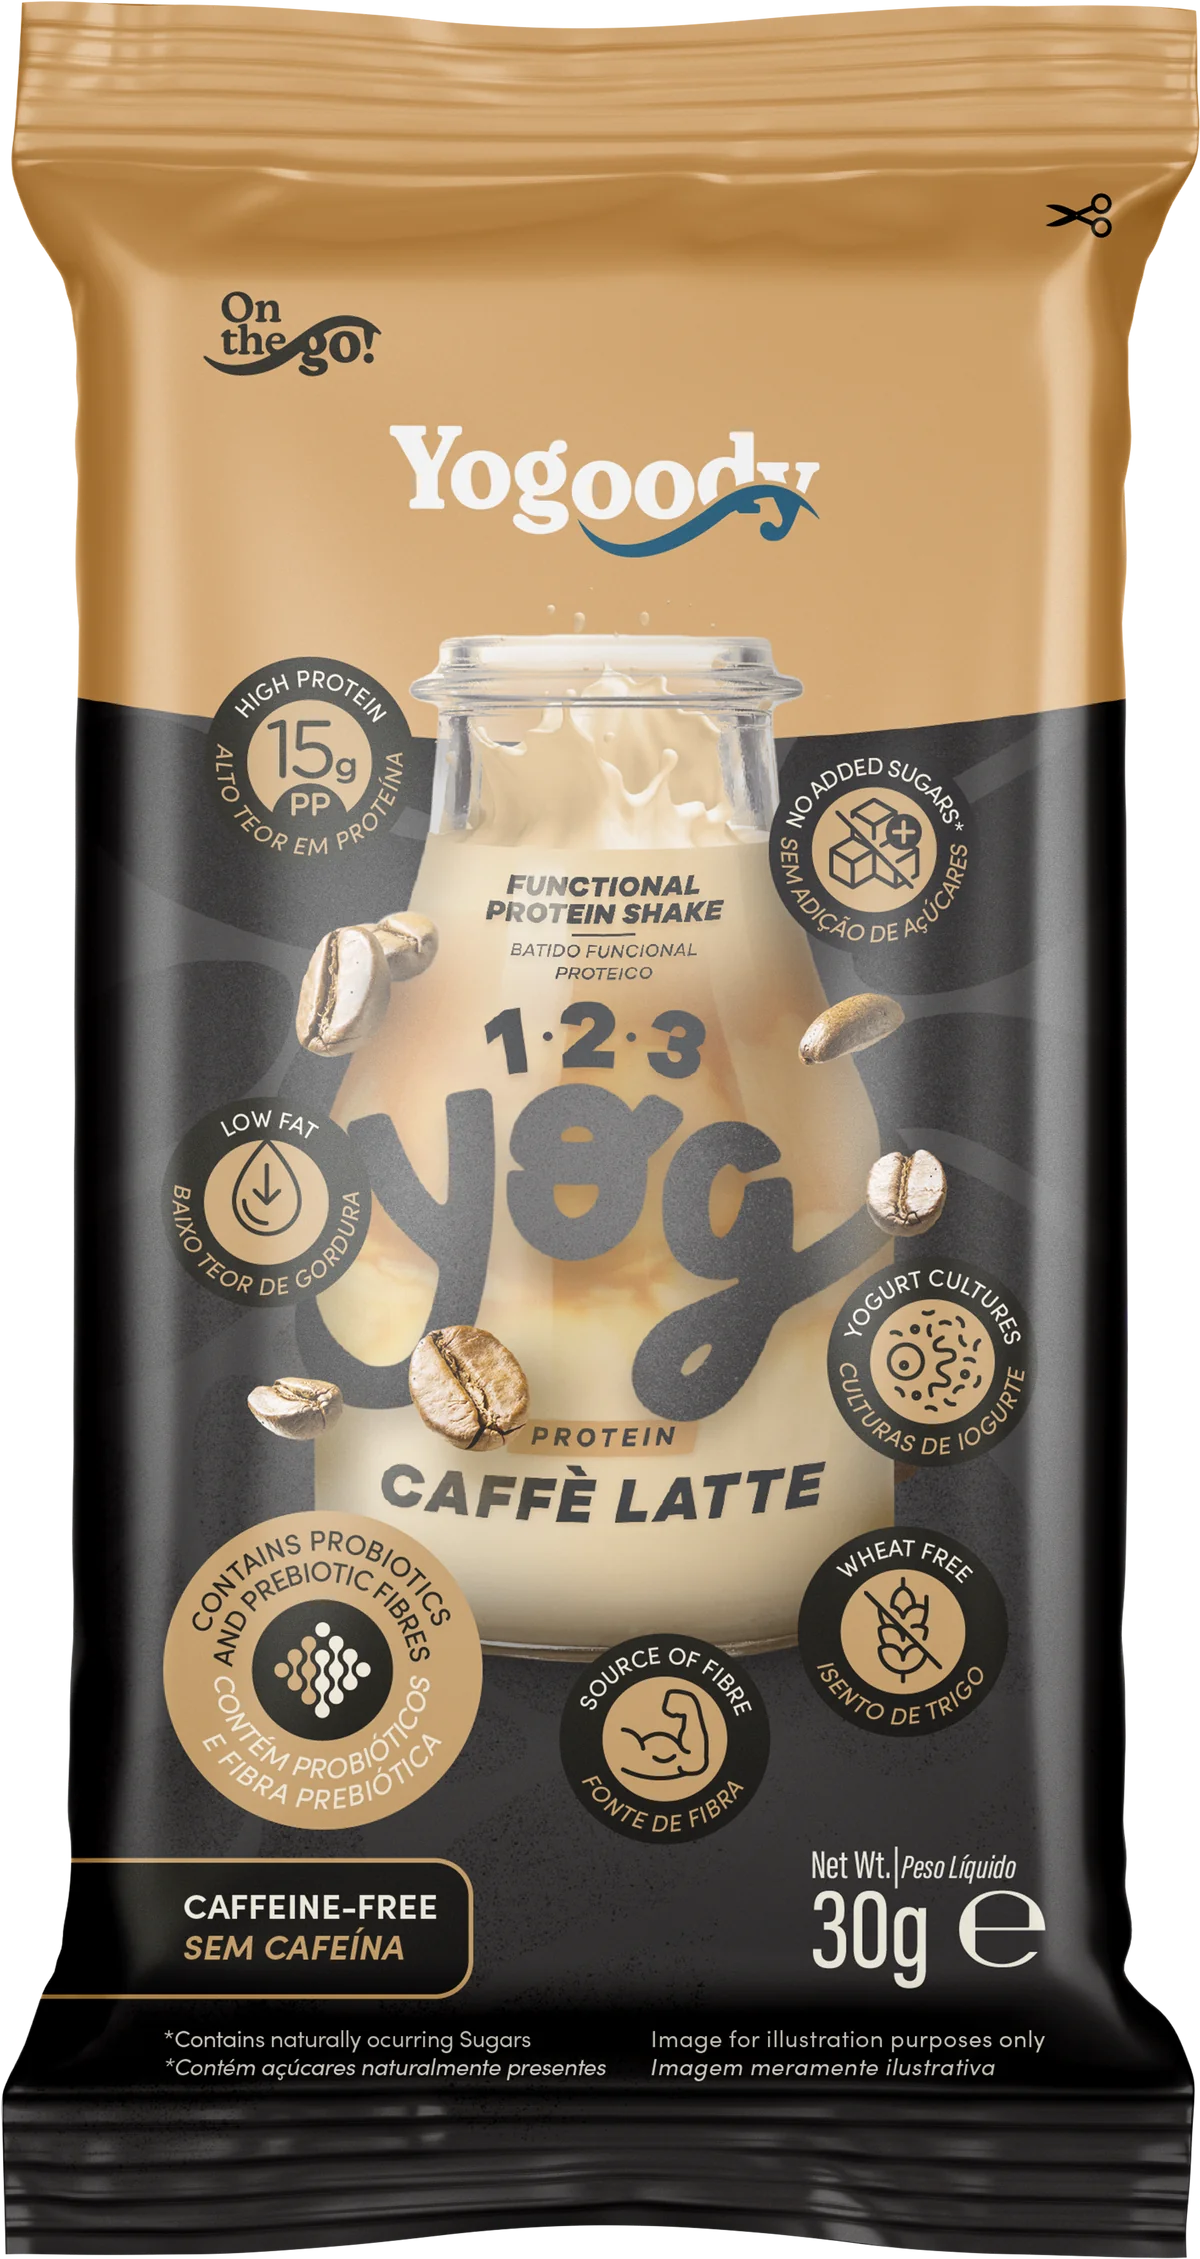 Welcome Pack - 1.2.3. YOG Protein Vanilla and Caffe Latte (caffeine-free) Shakes (10 x 30g sachets + FREE shaker)